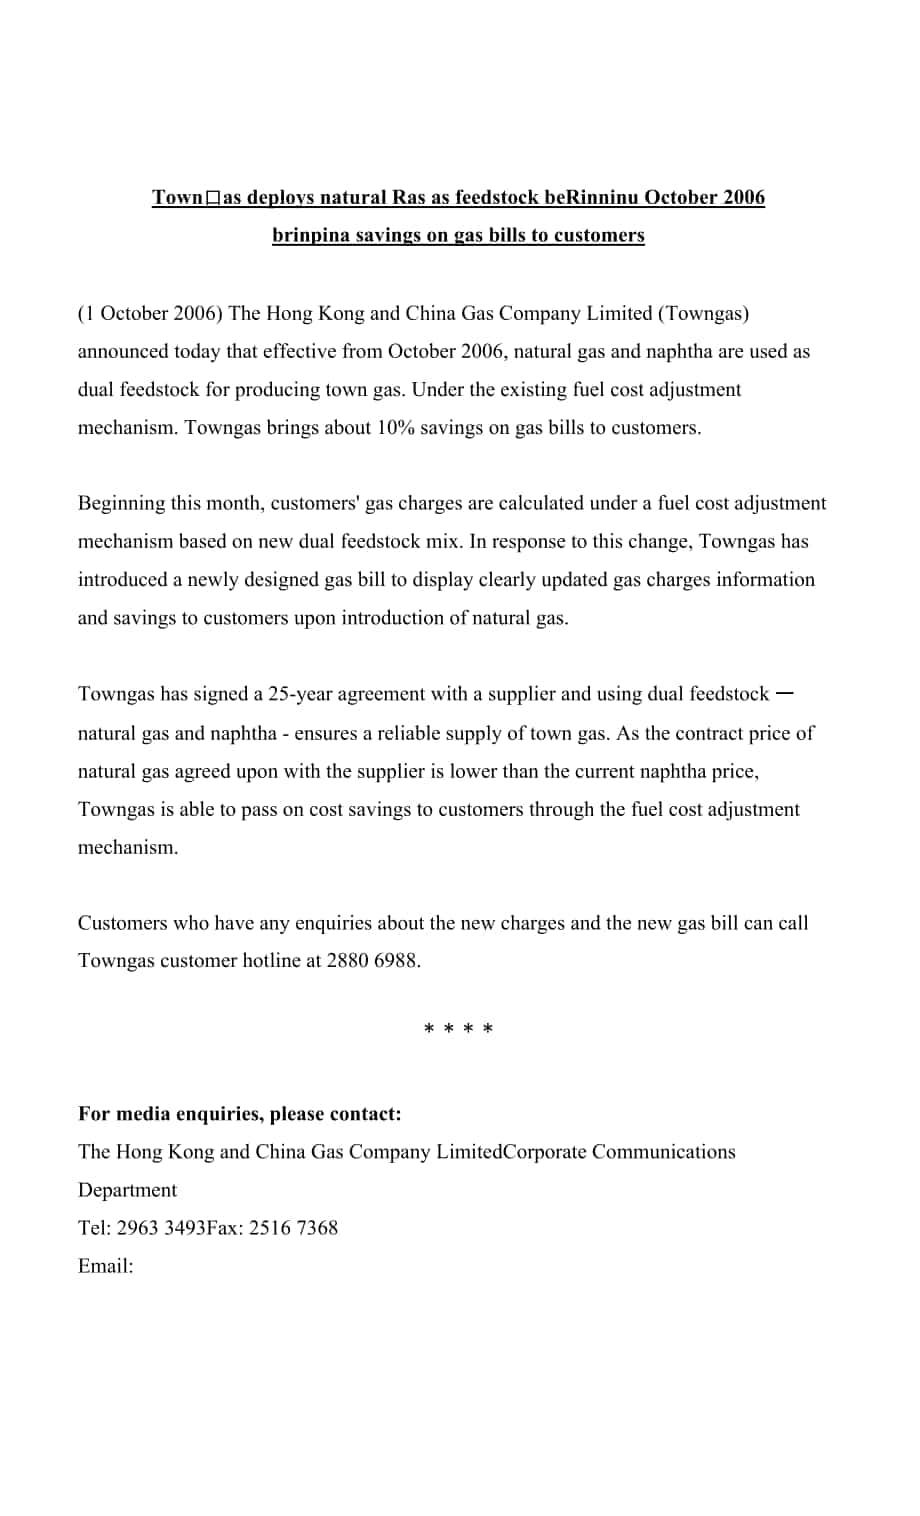 Towngas deploys natural gas as feedstock beginning ….docx_第1页